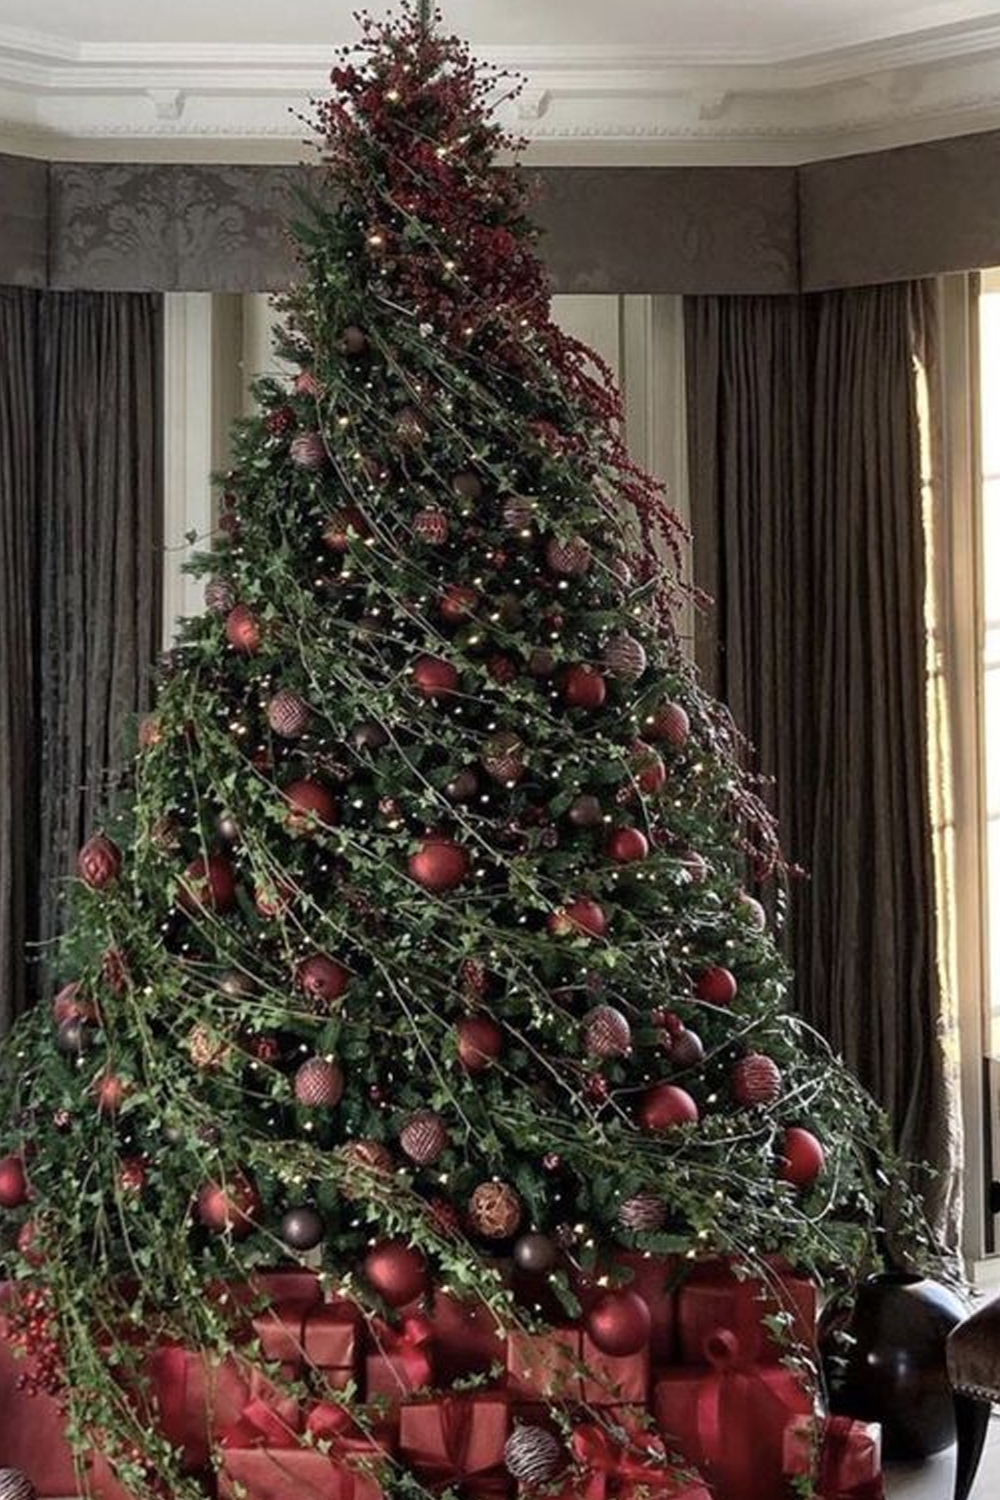 Not Your Average Christmas Tree- 9 Unique Holiday Tree Decorating Ideas & Inspiration